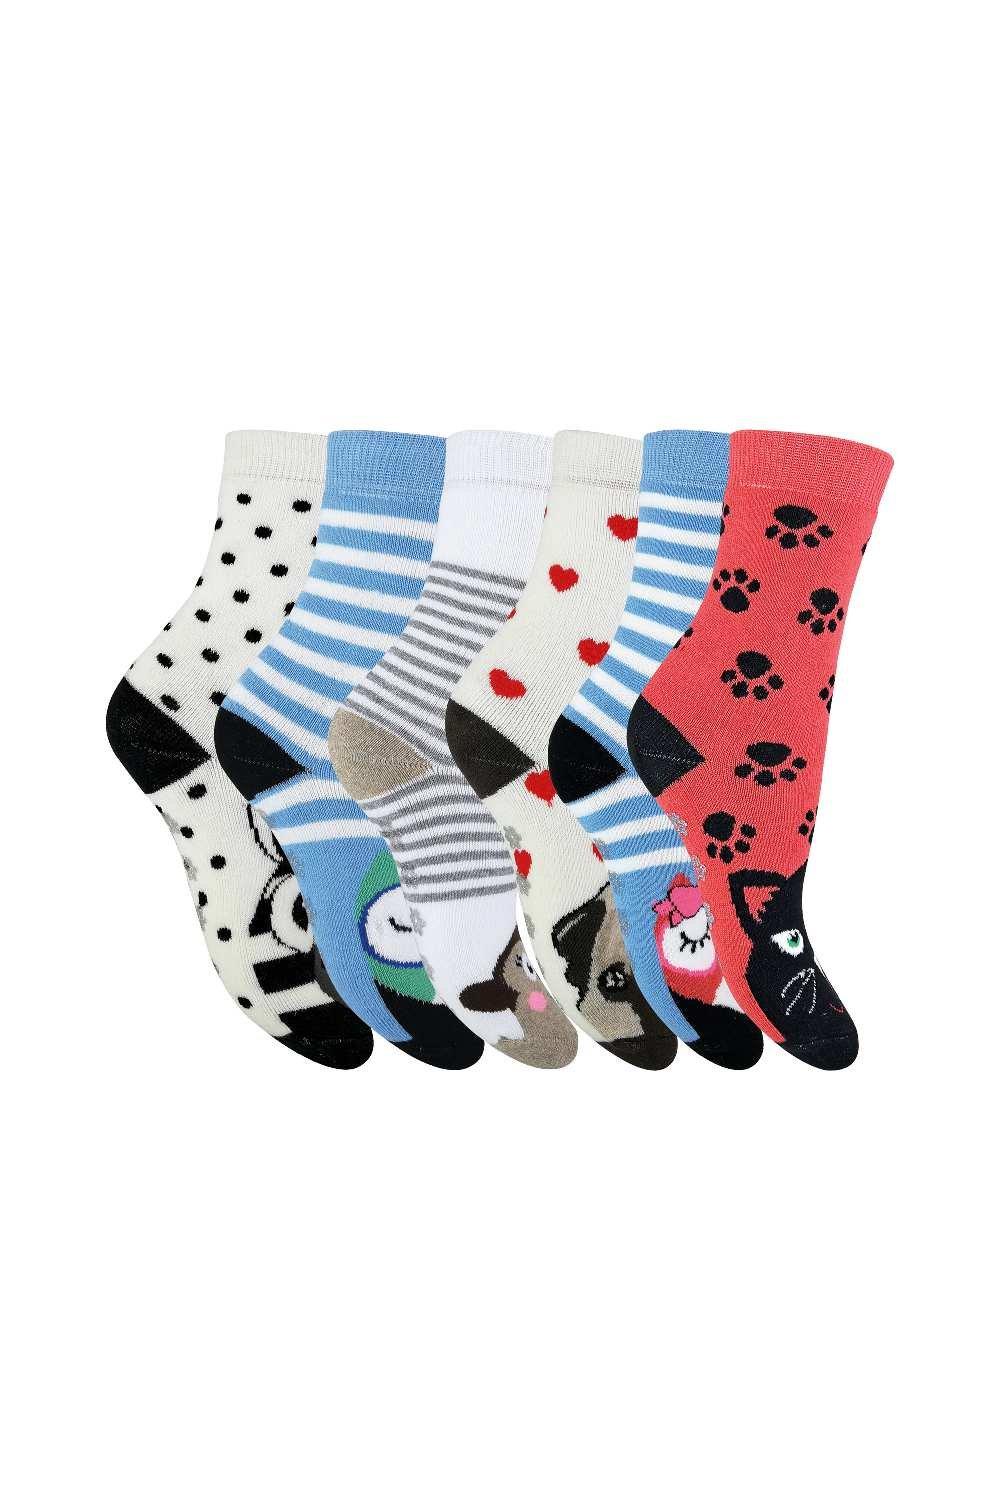 6 Pack Soft Thick Thermal Slipper Socks with Grippers